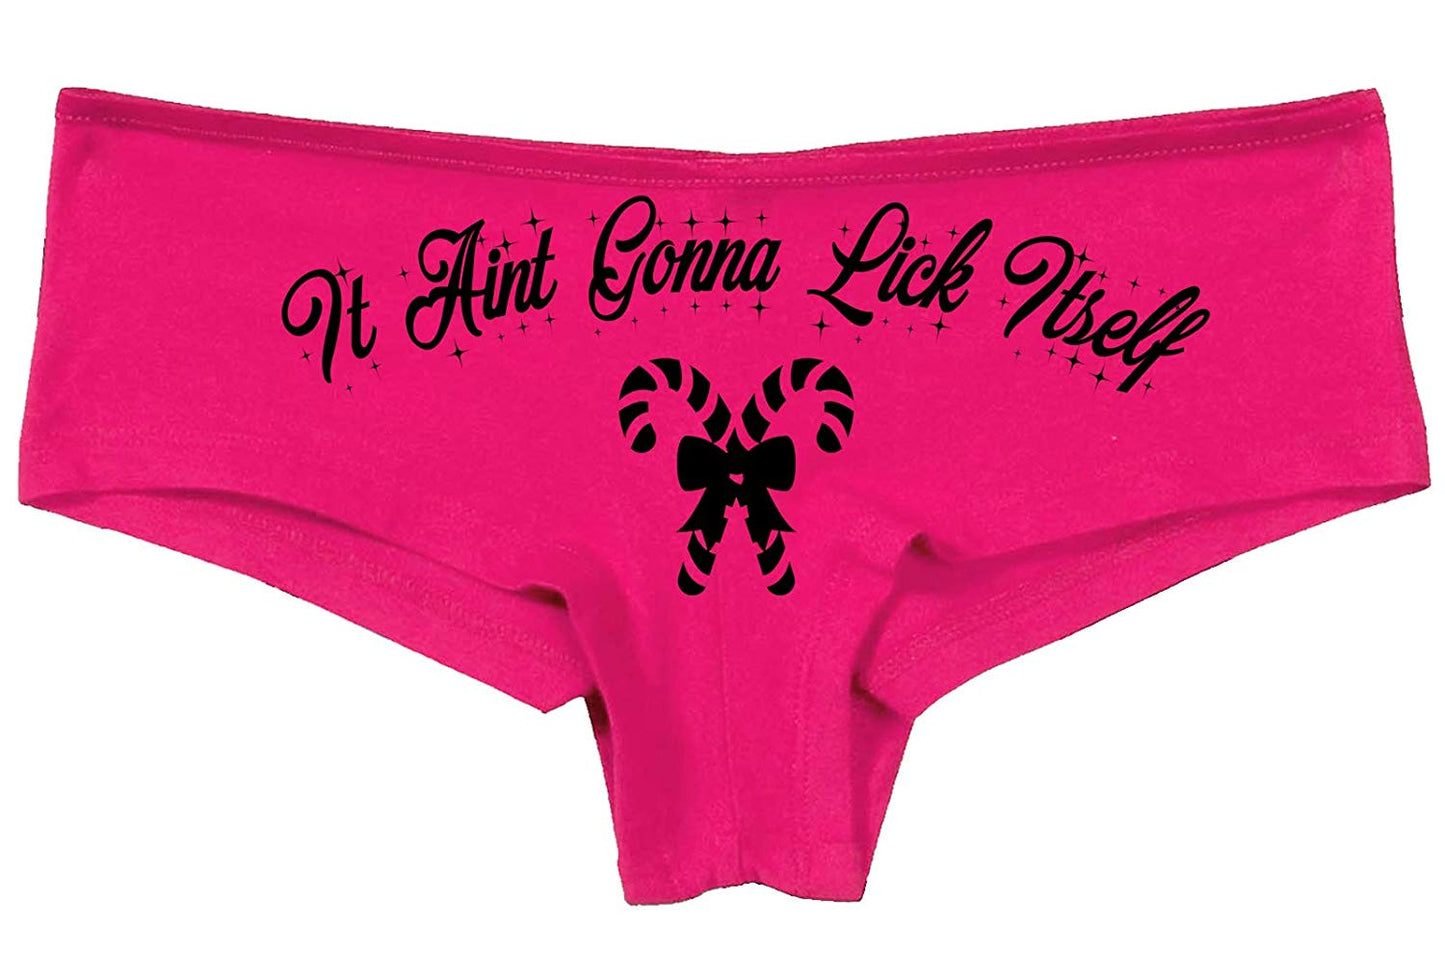 Knaughty Knickers Christmas Funny Pink Panties Aint isn't Gonna Lick Itself Candy